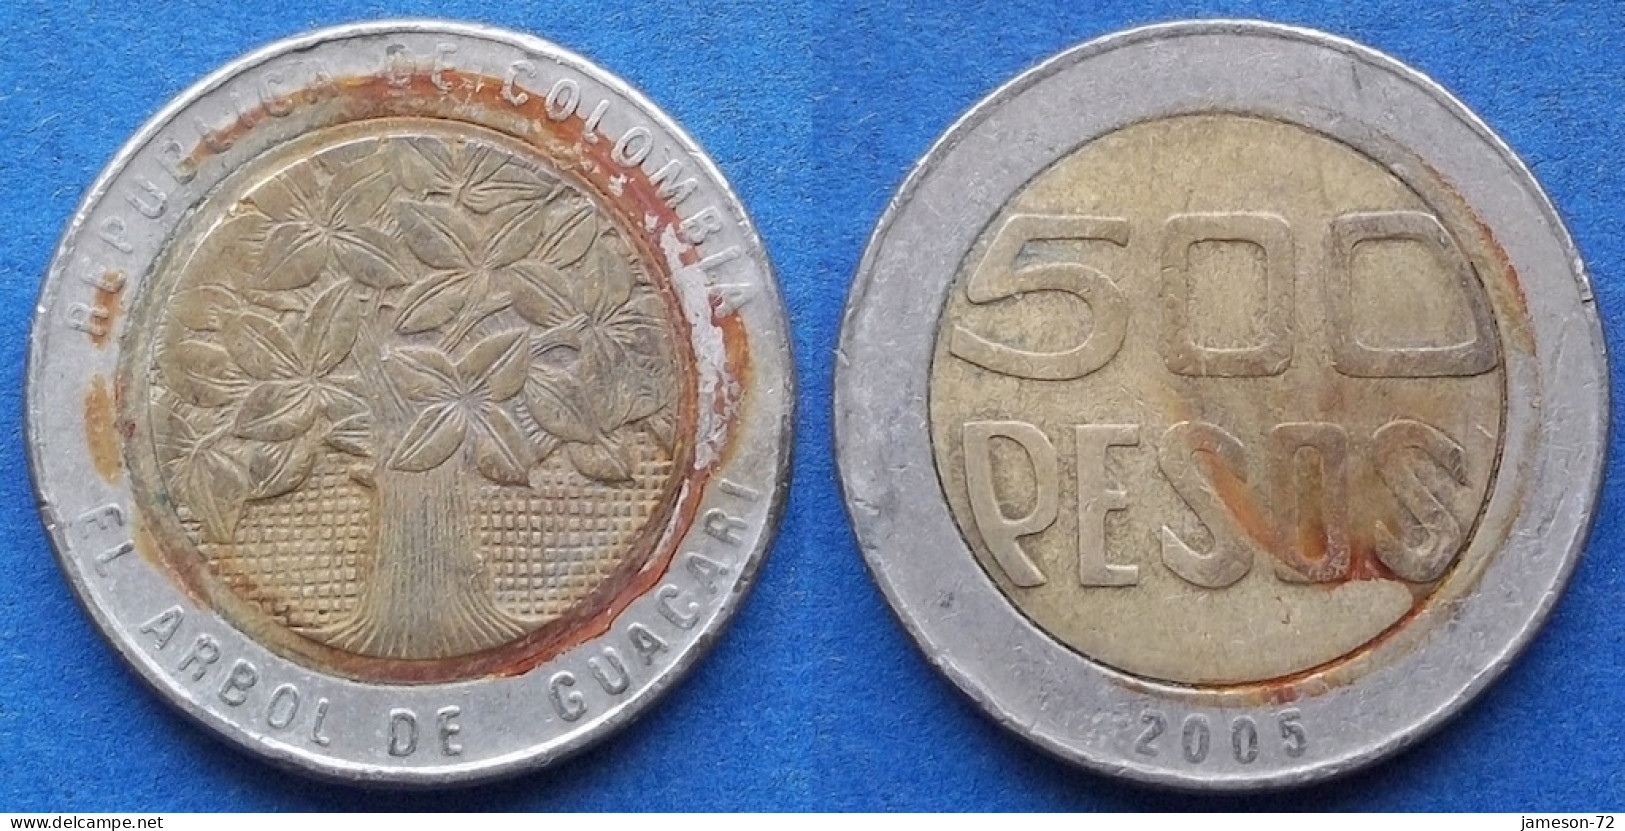 COLOMBIA - 500 Pesos 2005 "Guacari Tree" KM# 286 Republic - Edelweiss Coins - Colombia